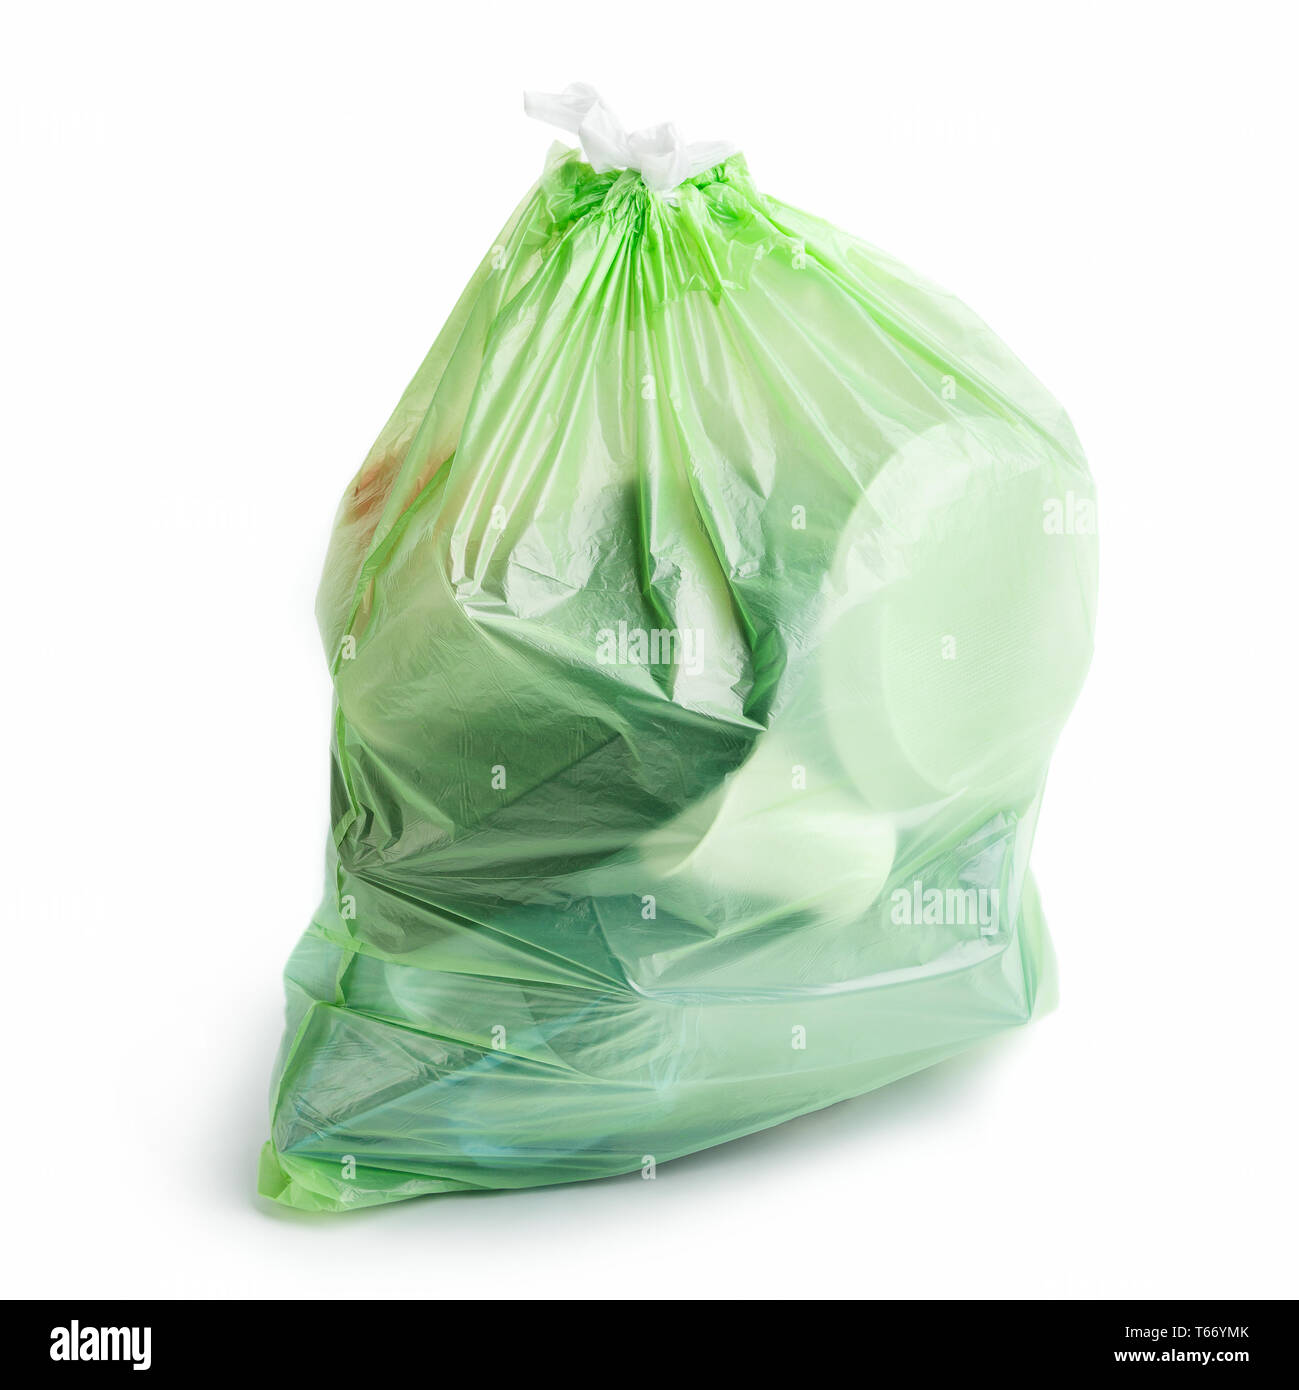 blue trash bag with recycling logo isolated on white Stock Photo - Alamy